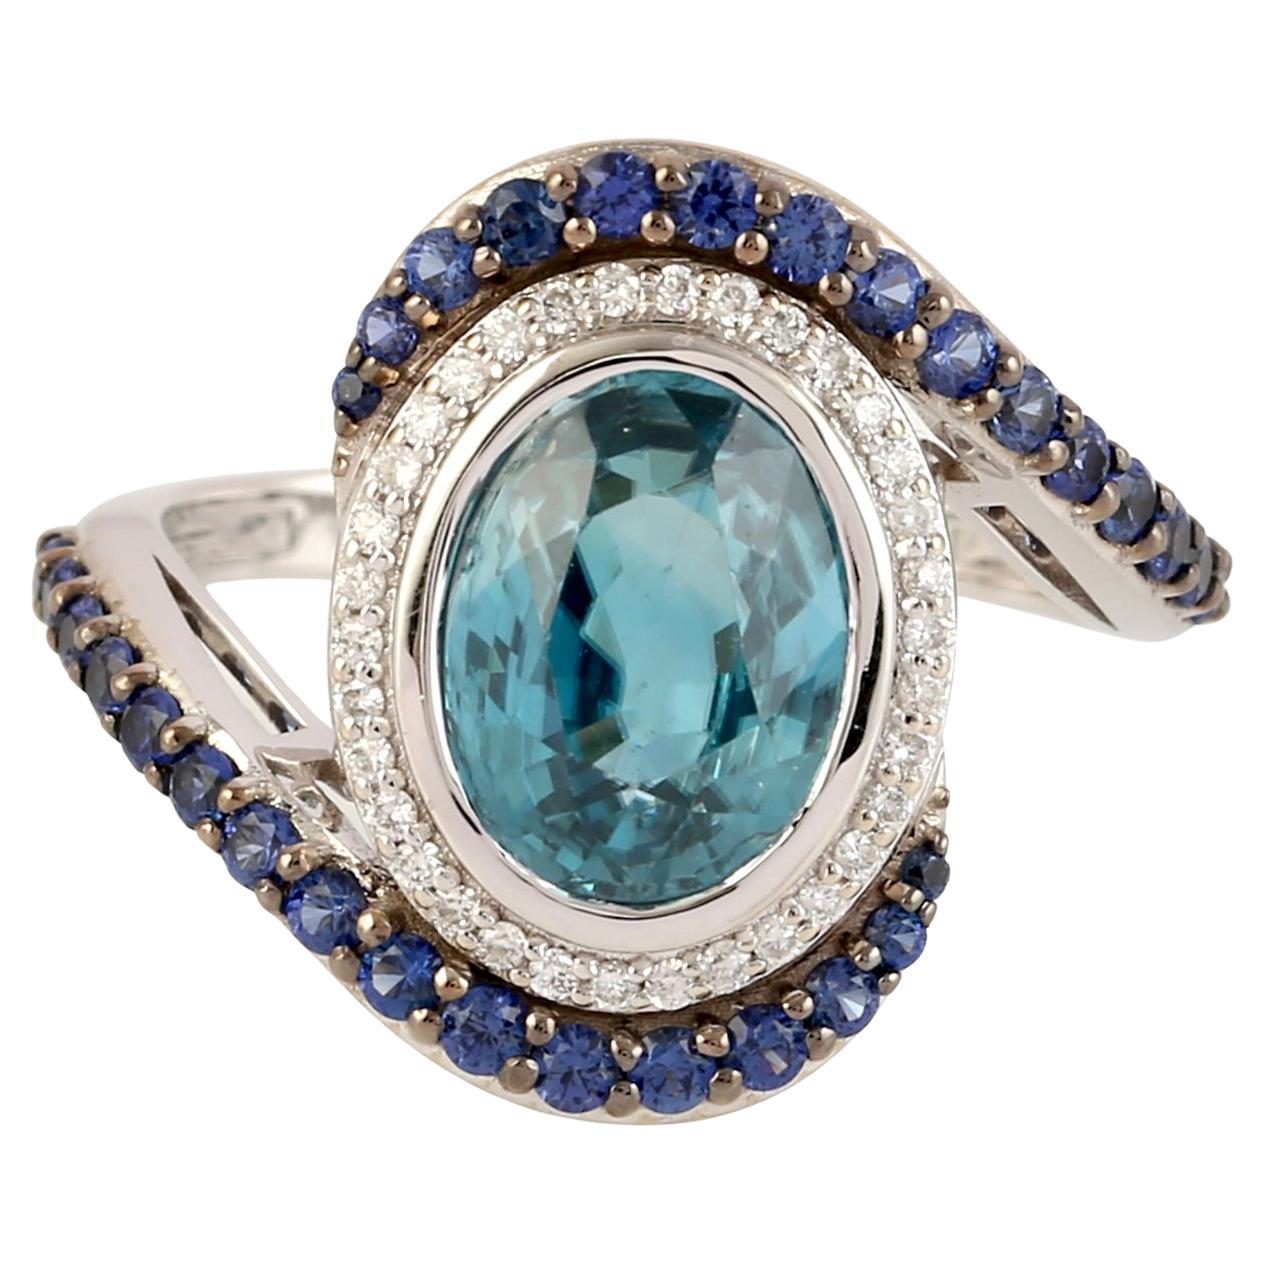 Blue Zircon & Sapphire Ring With Diamonds Made In 18k Gold For Sale